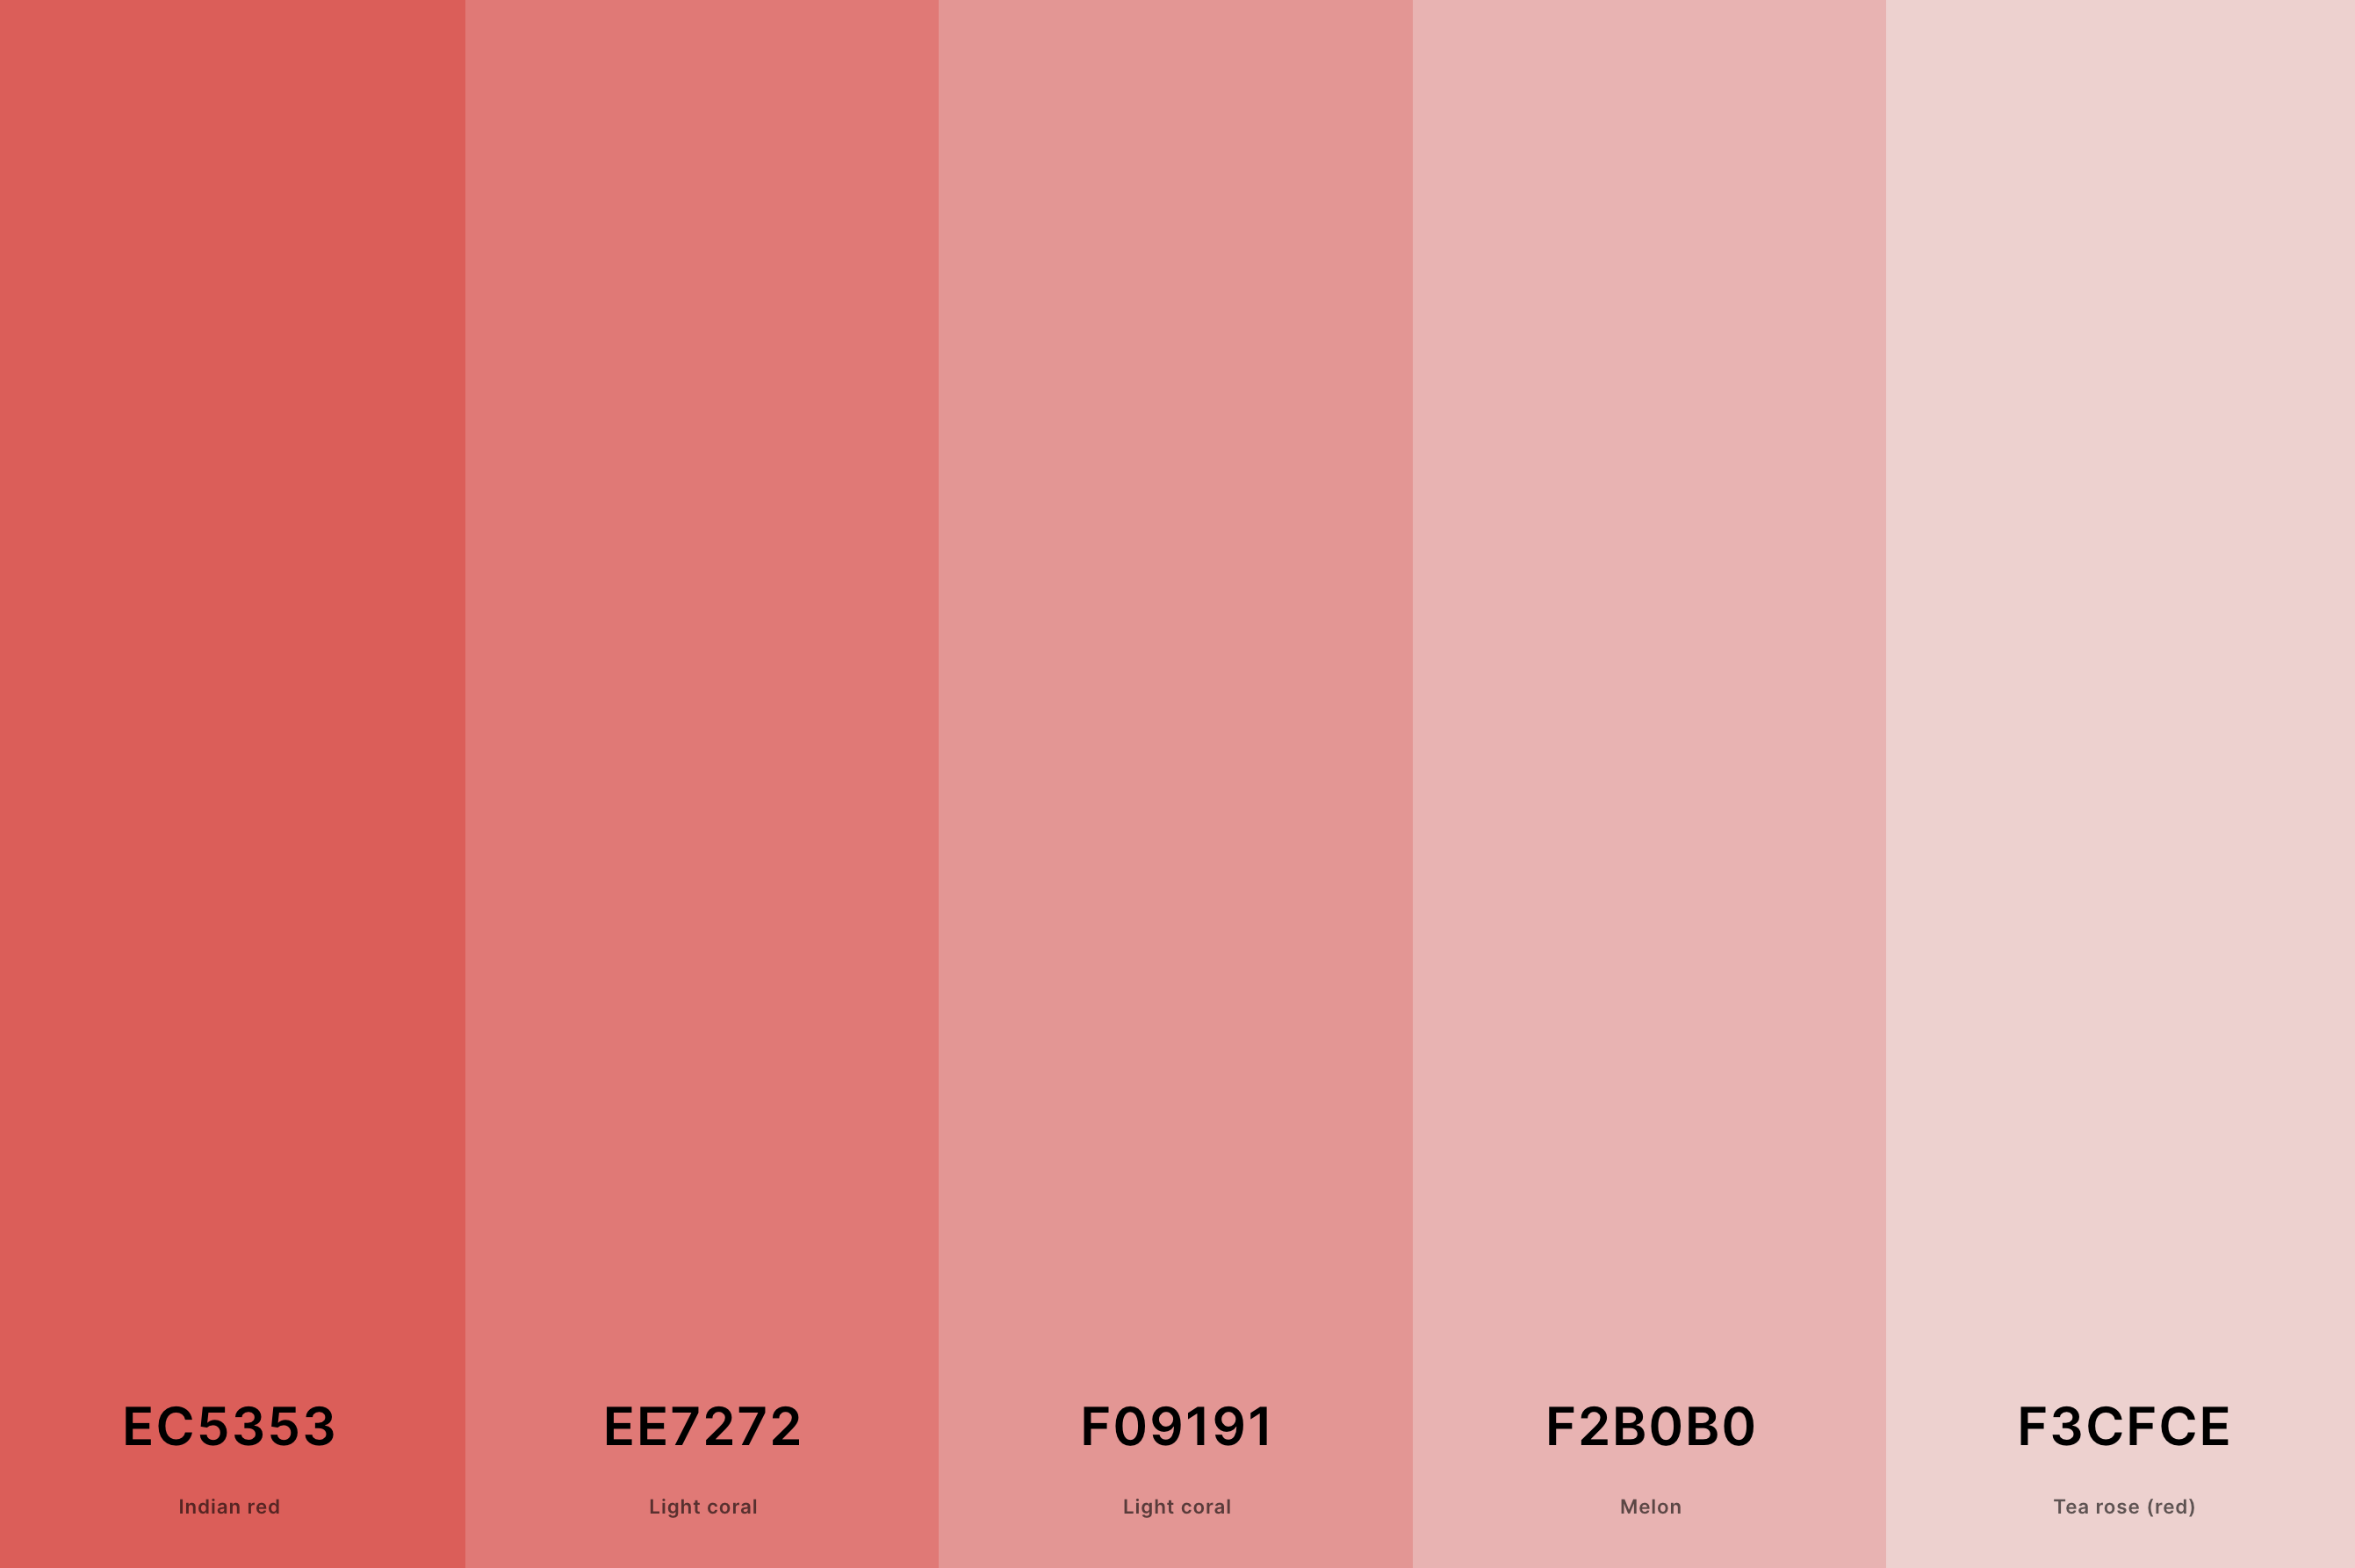 19. Pastel Red Color Palette Color Palette with Indian Red (Hex #EC5353) + Light Coral (Hex #EE7272) + Light Coral (Hex #F09191) + Melon (Hex #F2B0B0) + Tea Rose (Red) (Hex #F3CFCE) Color Palette with Hex Codes